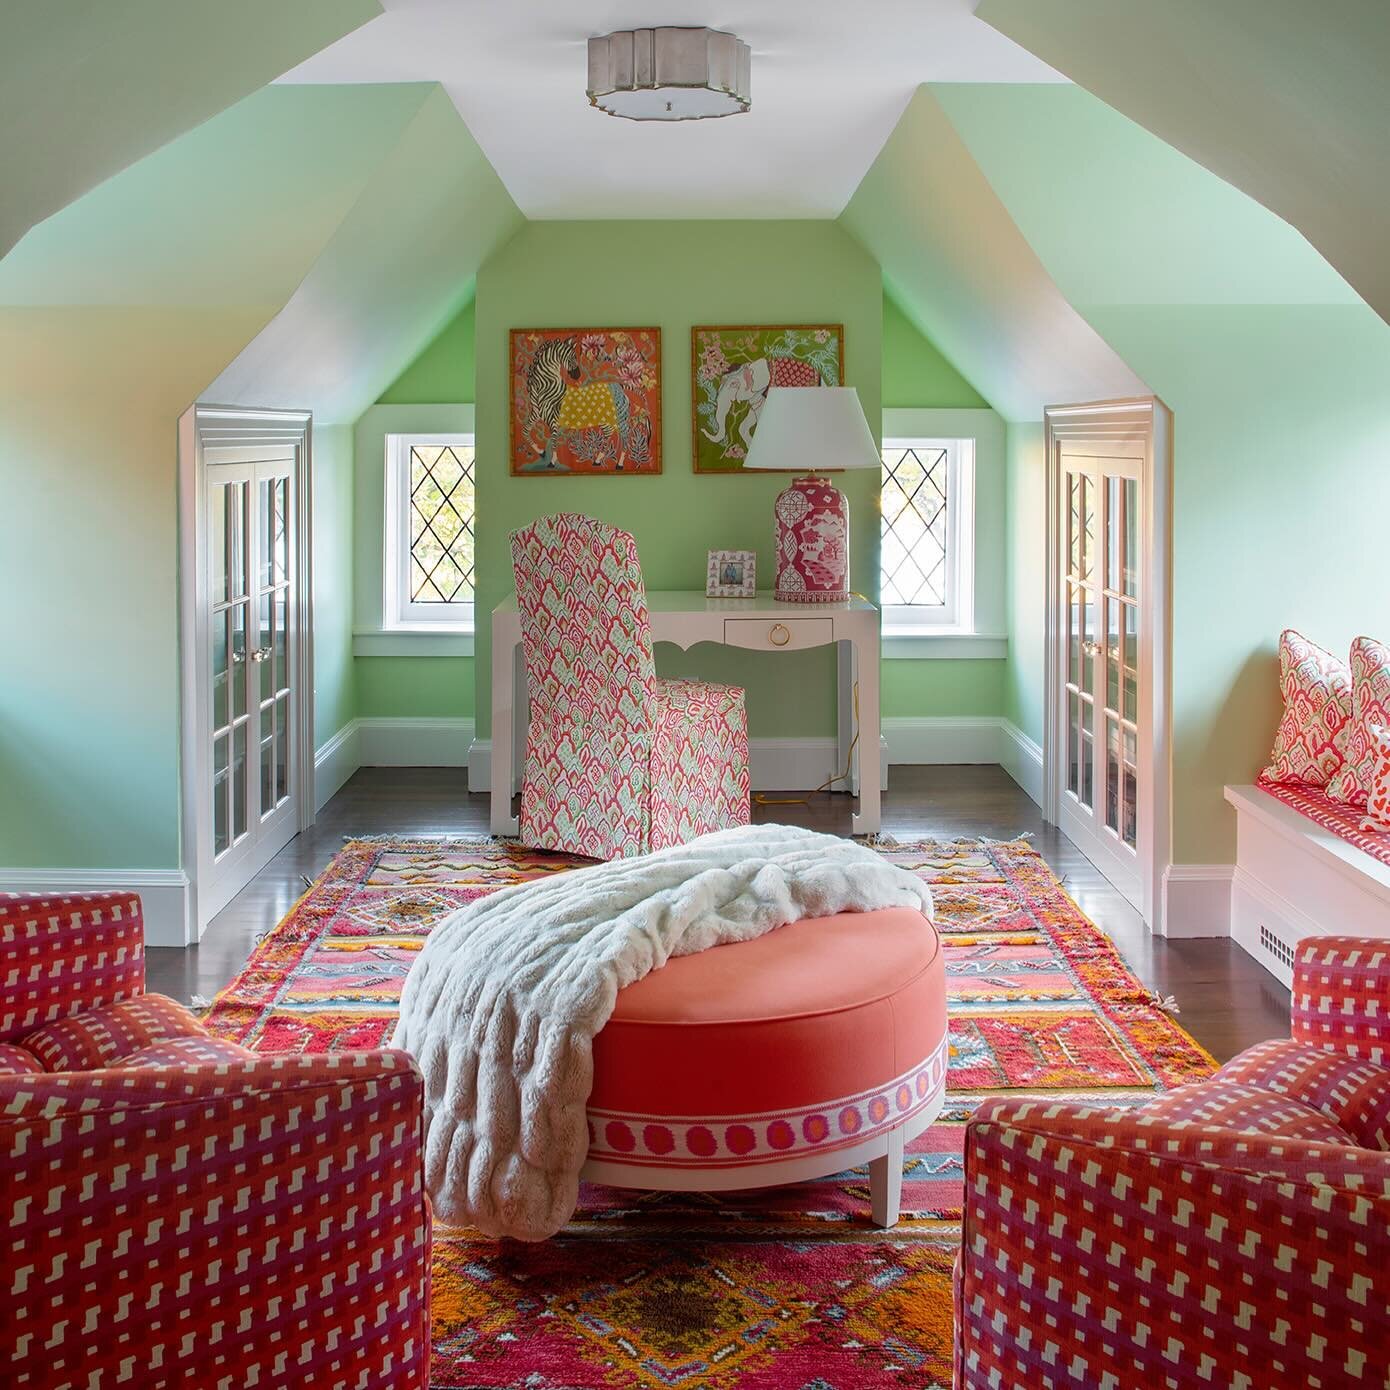 Sunshine + color = happy happy ! We created this room in an old attic space so that my client who is the ultimate boy Mom could have a girlie space to retreat too!
.
.
.
.
#colorfulspaces #girlyroom #patternonpattern #customfurniture #customcolors #i